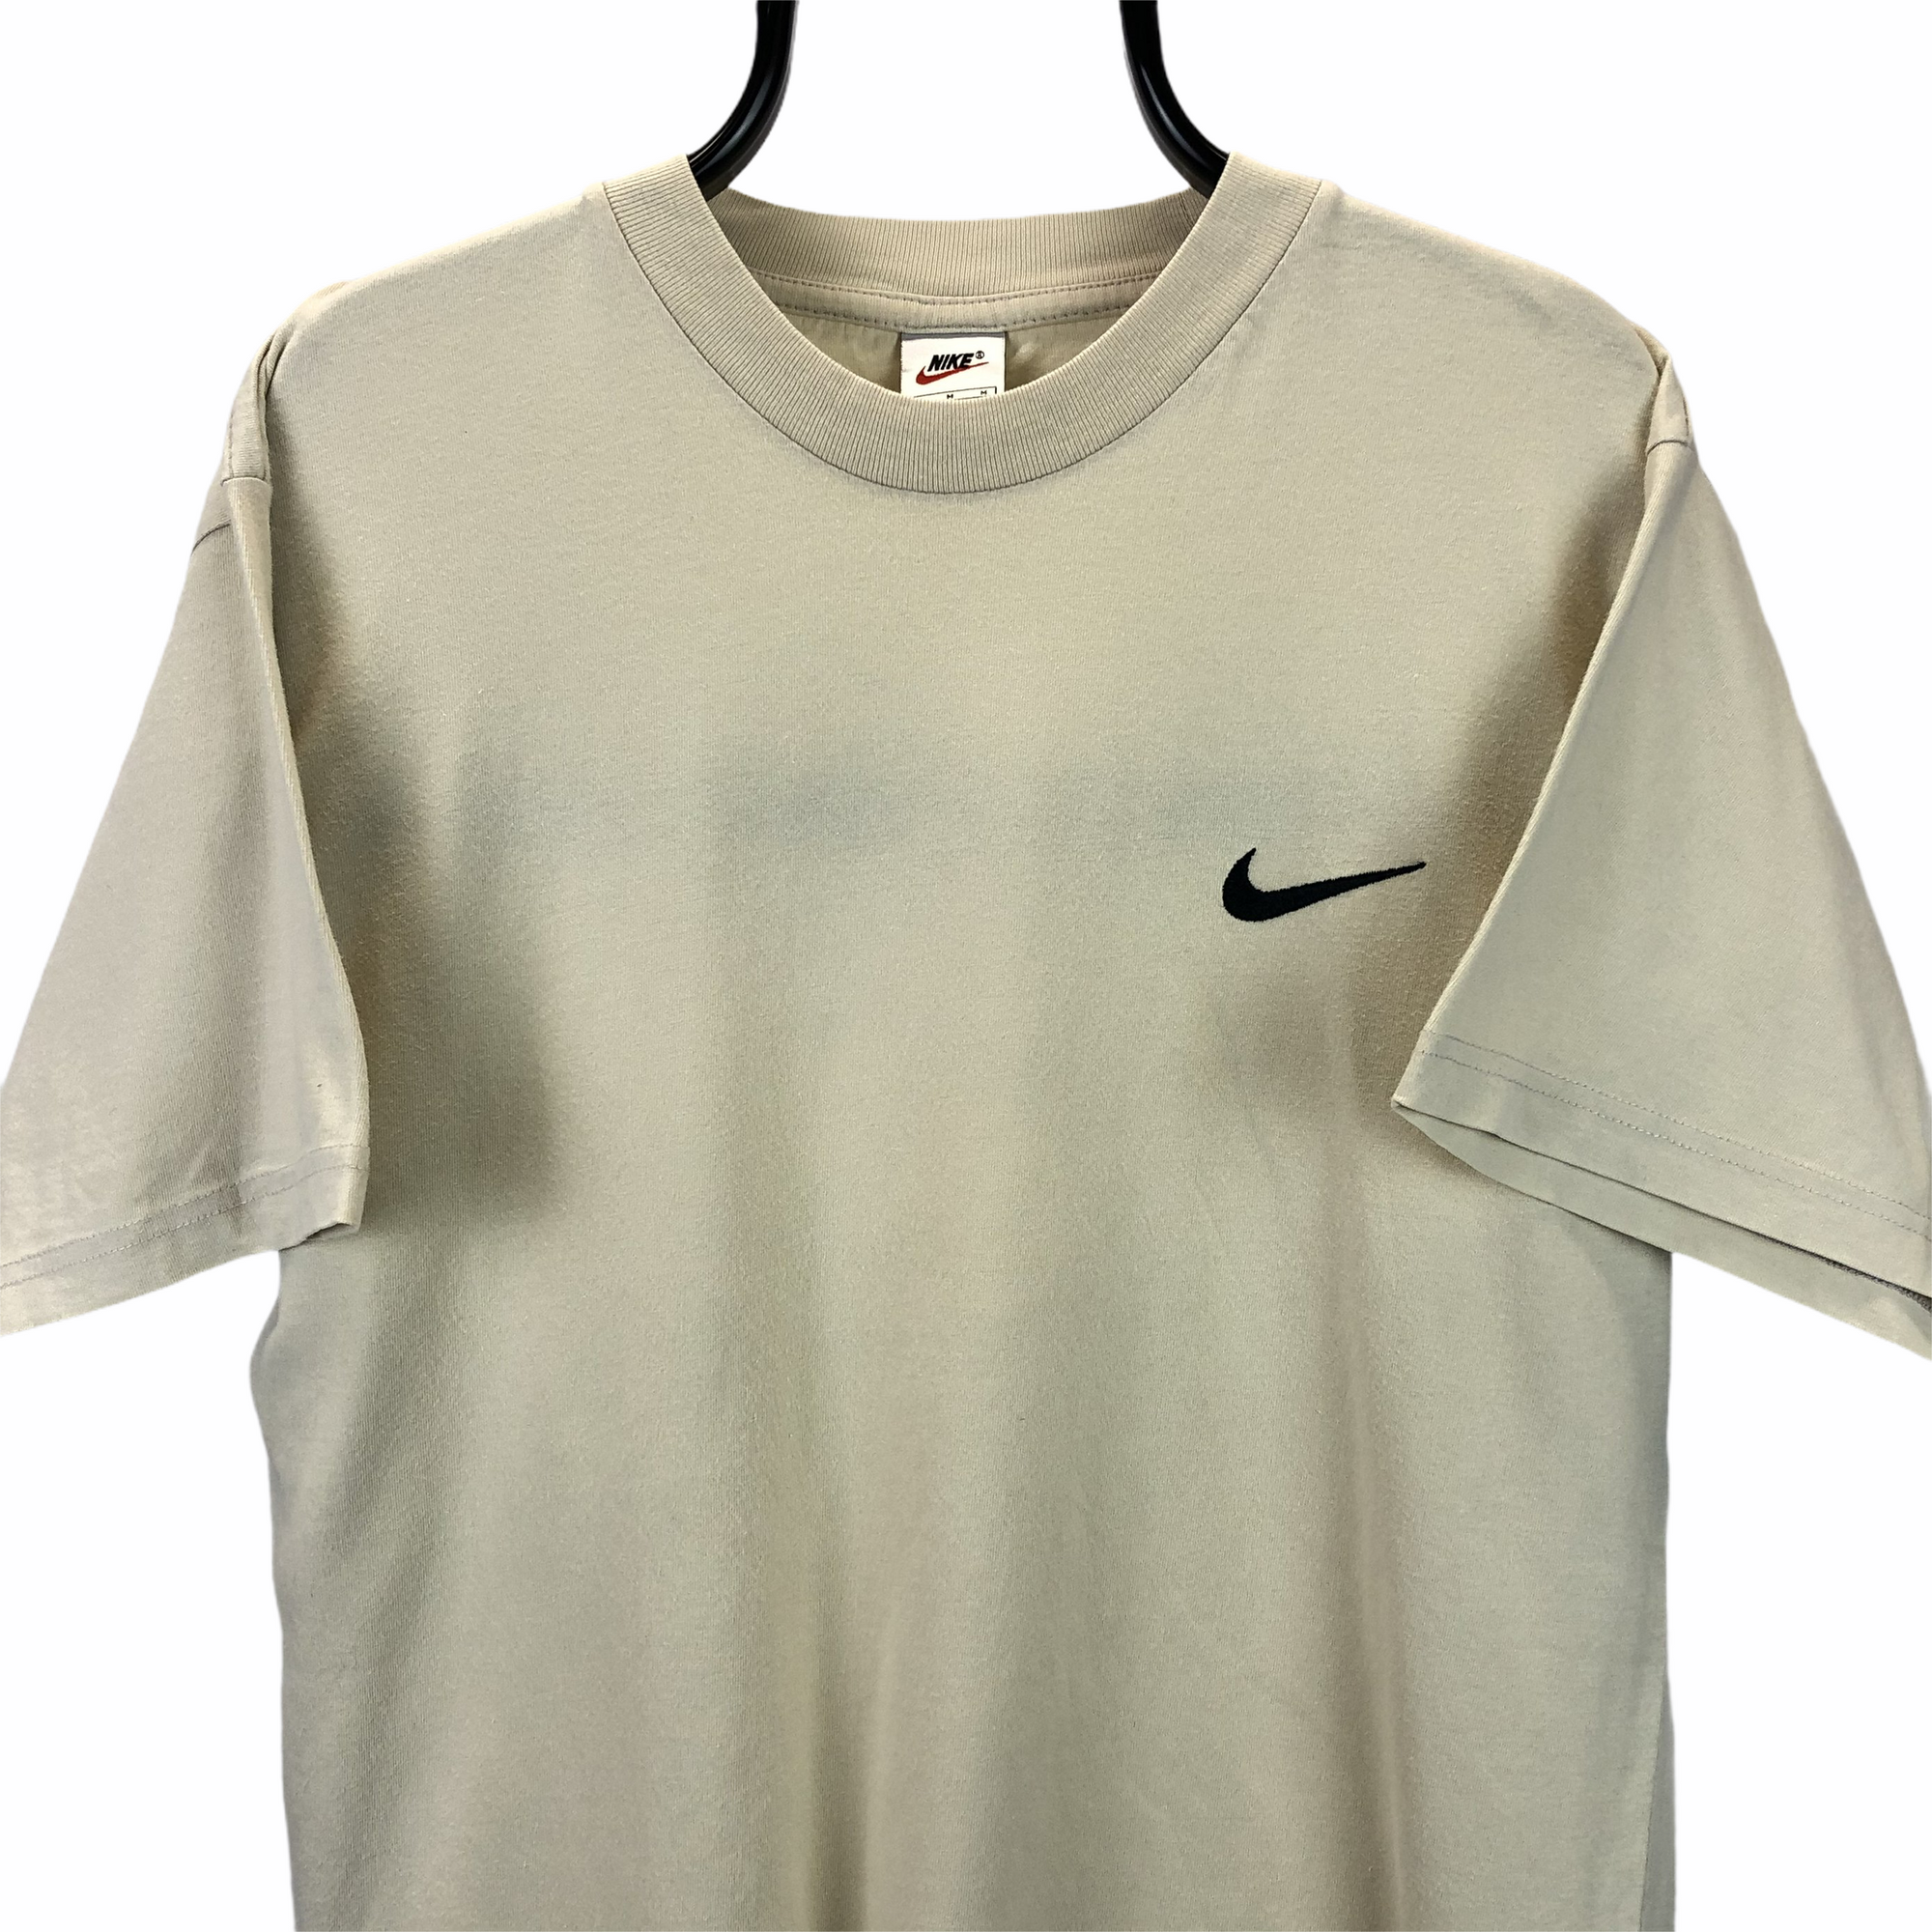 Vintage 90s Nike Embroidered Small Swoosh Tee in Beige - Men's Medium/Women's Large